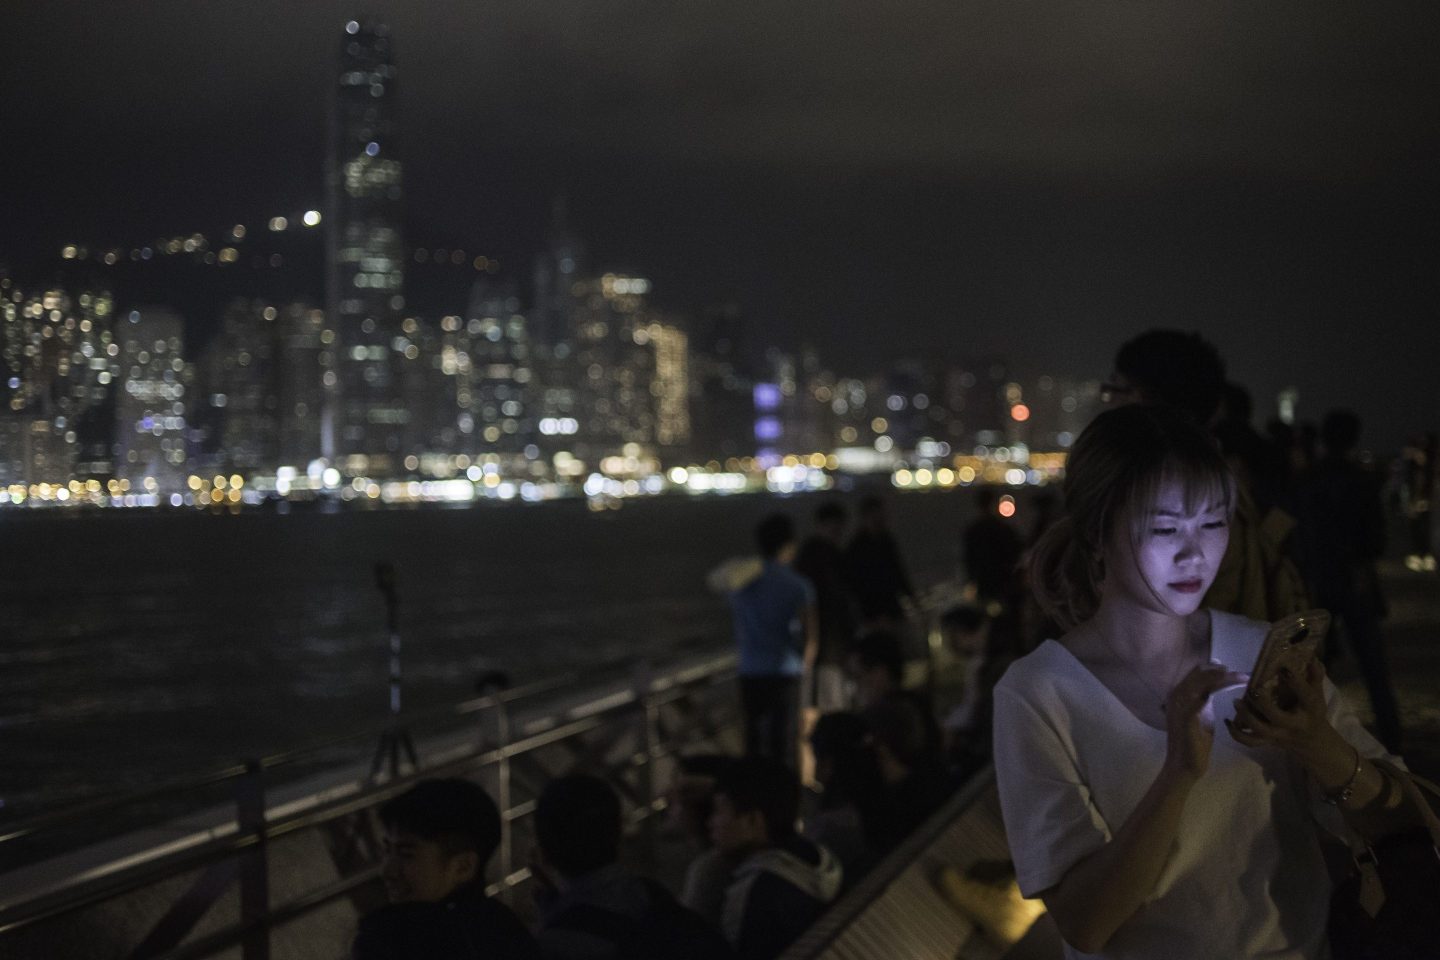 A woman looks at a mobile phone after the skyline buildings lights were switched off for the Earth Hour environmental campaign in Hong Kong on March 24, 2018. / AFP PHOTO / Philip FONG (Photo credit should read PHILIP FONG/AFP via Getty Images)